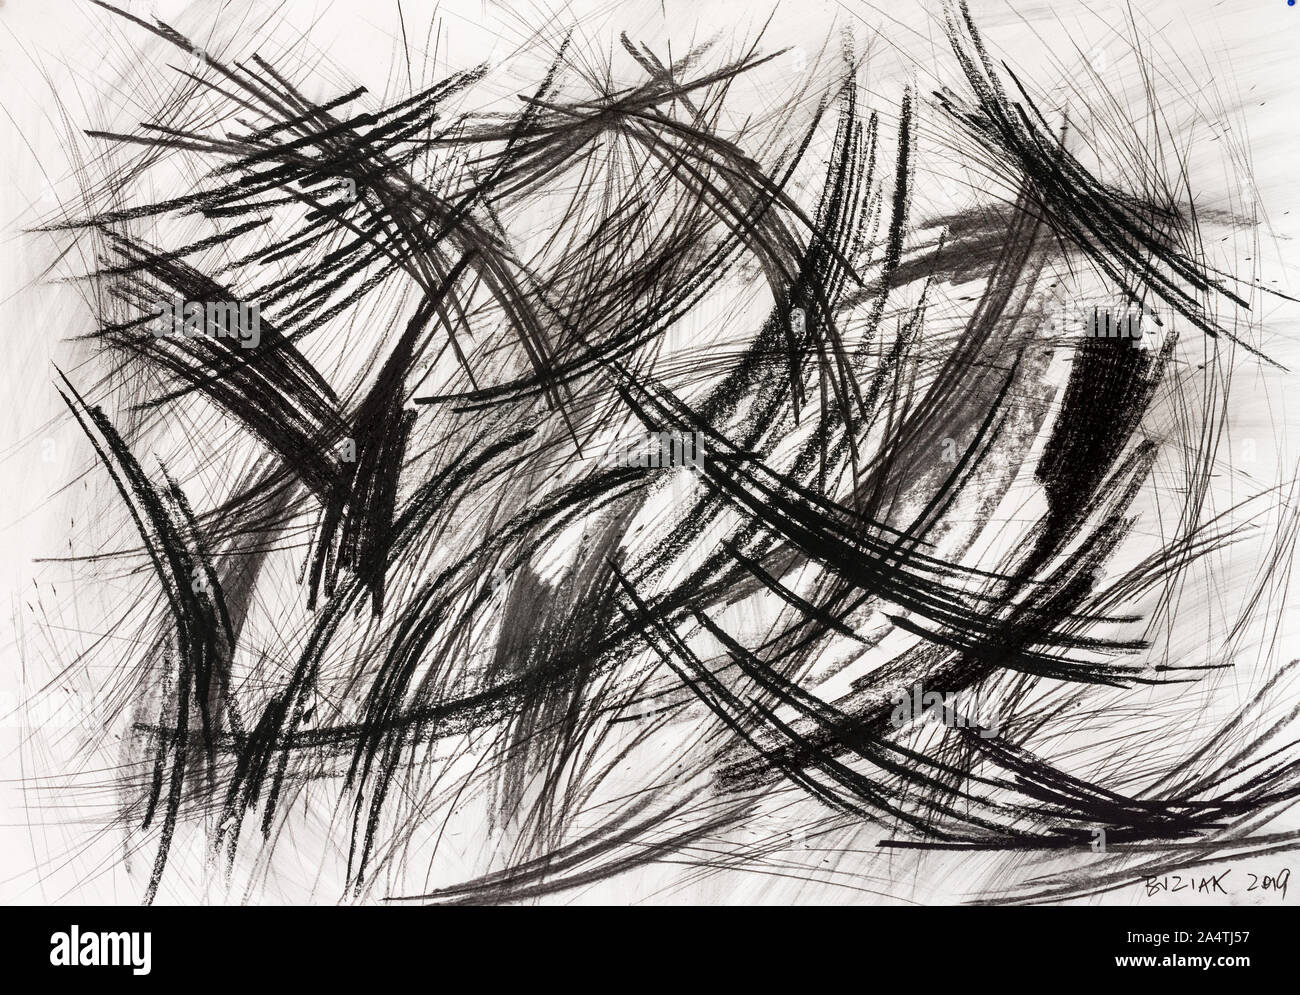 Charcoal art abstract by Prajakta P